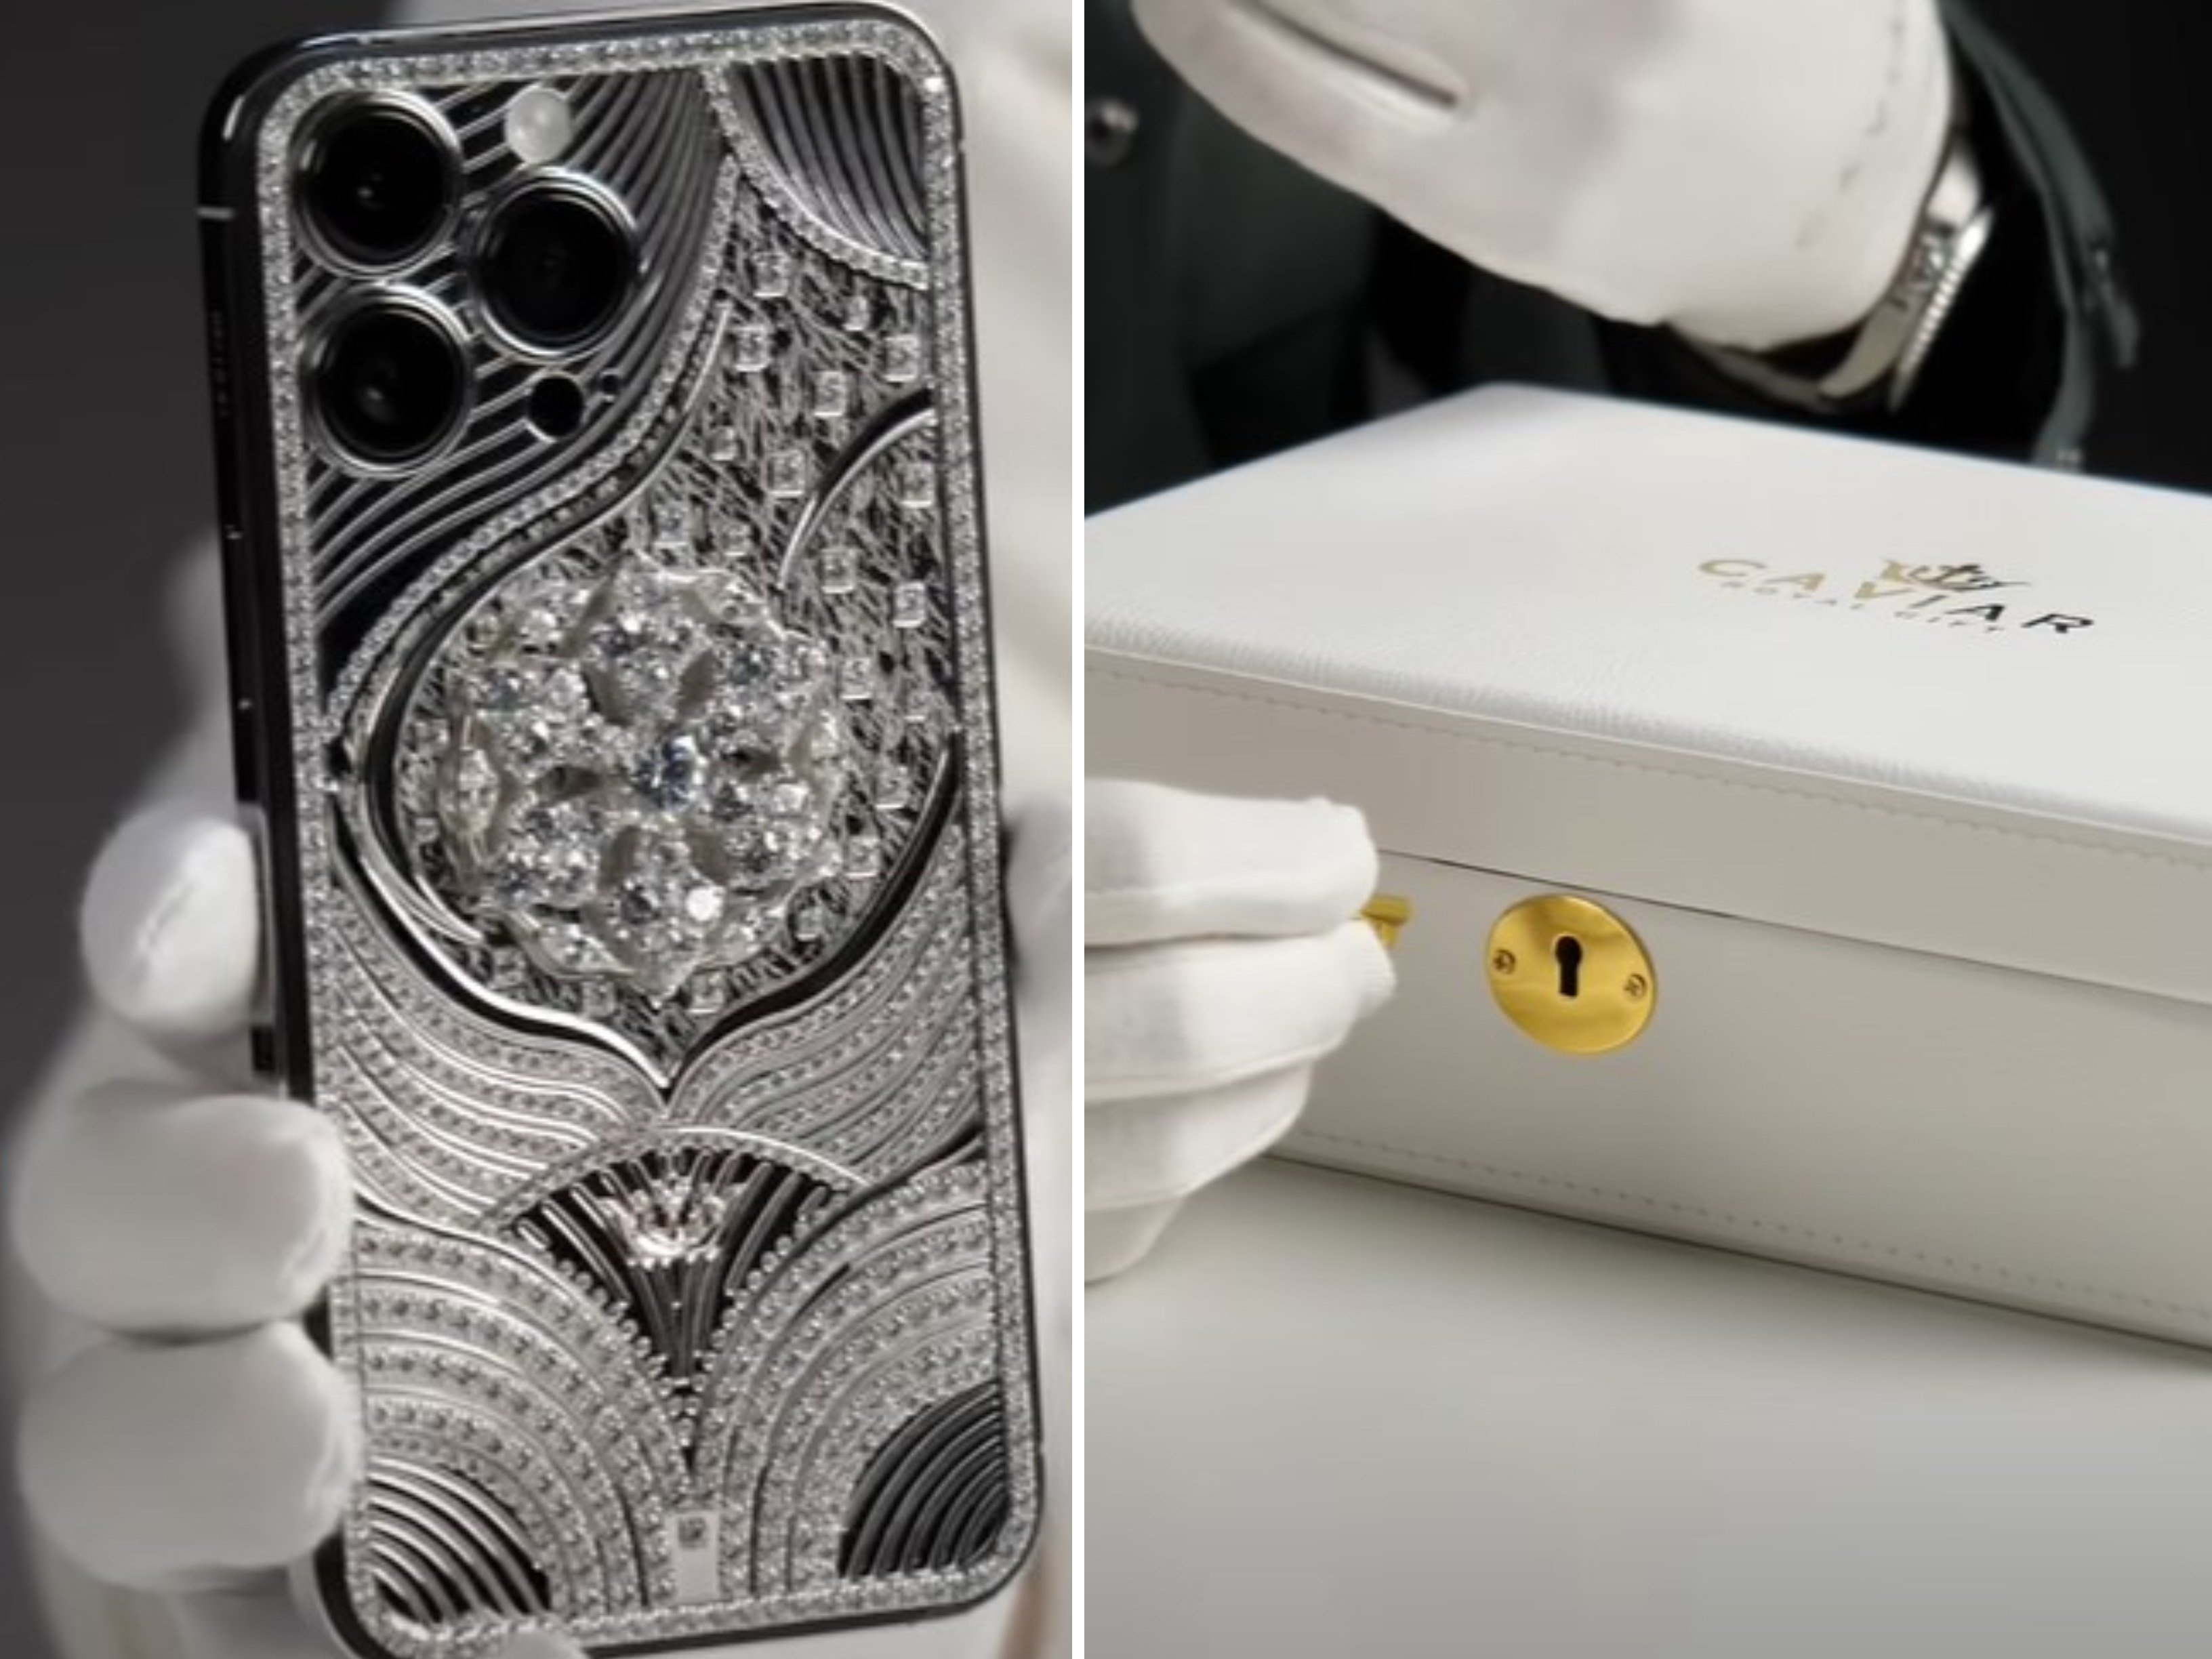 Download Look luxurious with an iPhone covered in Louis Vuitton's